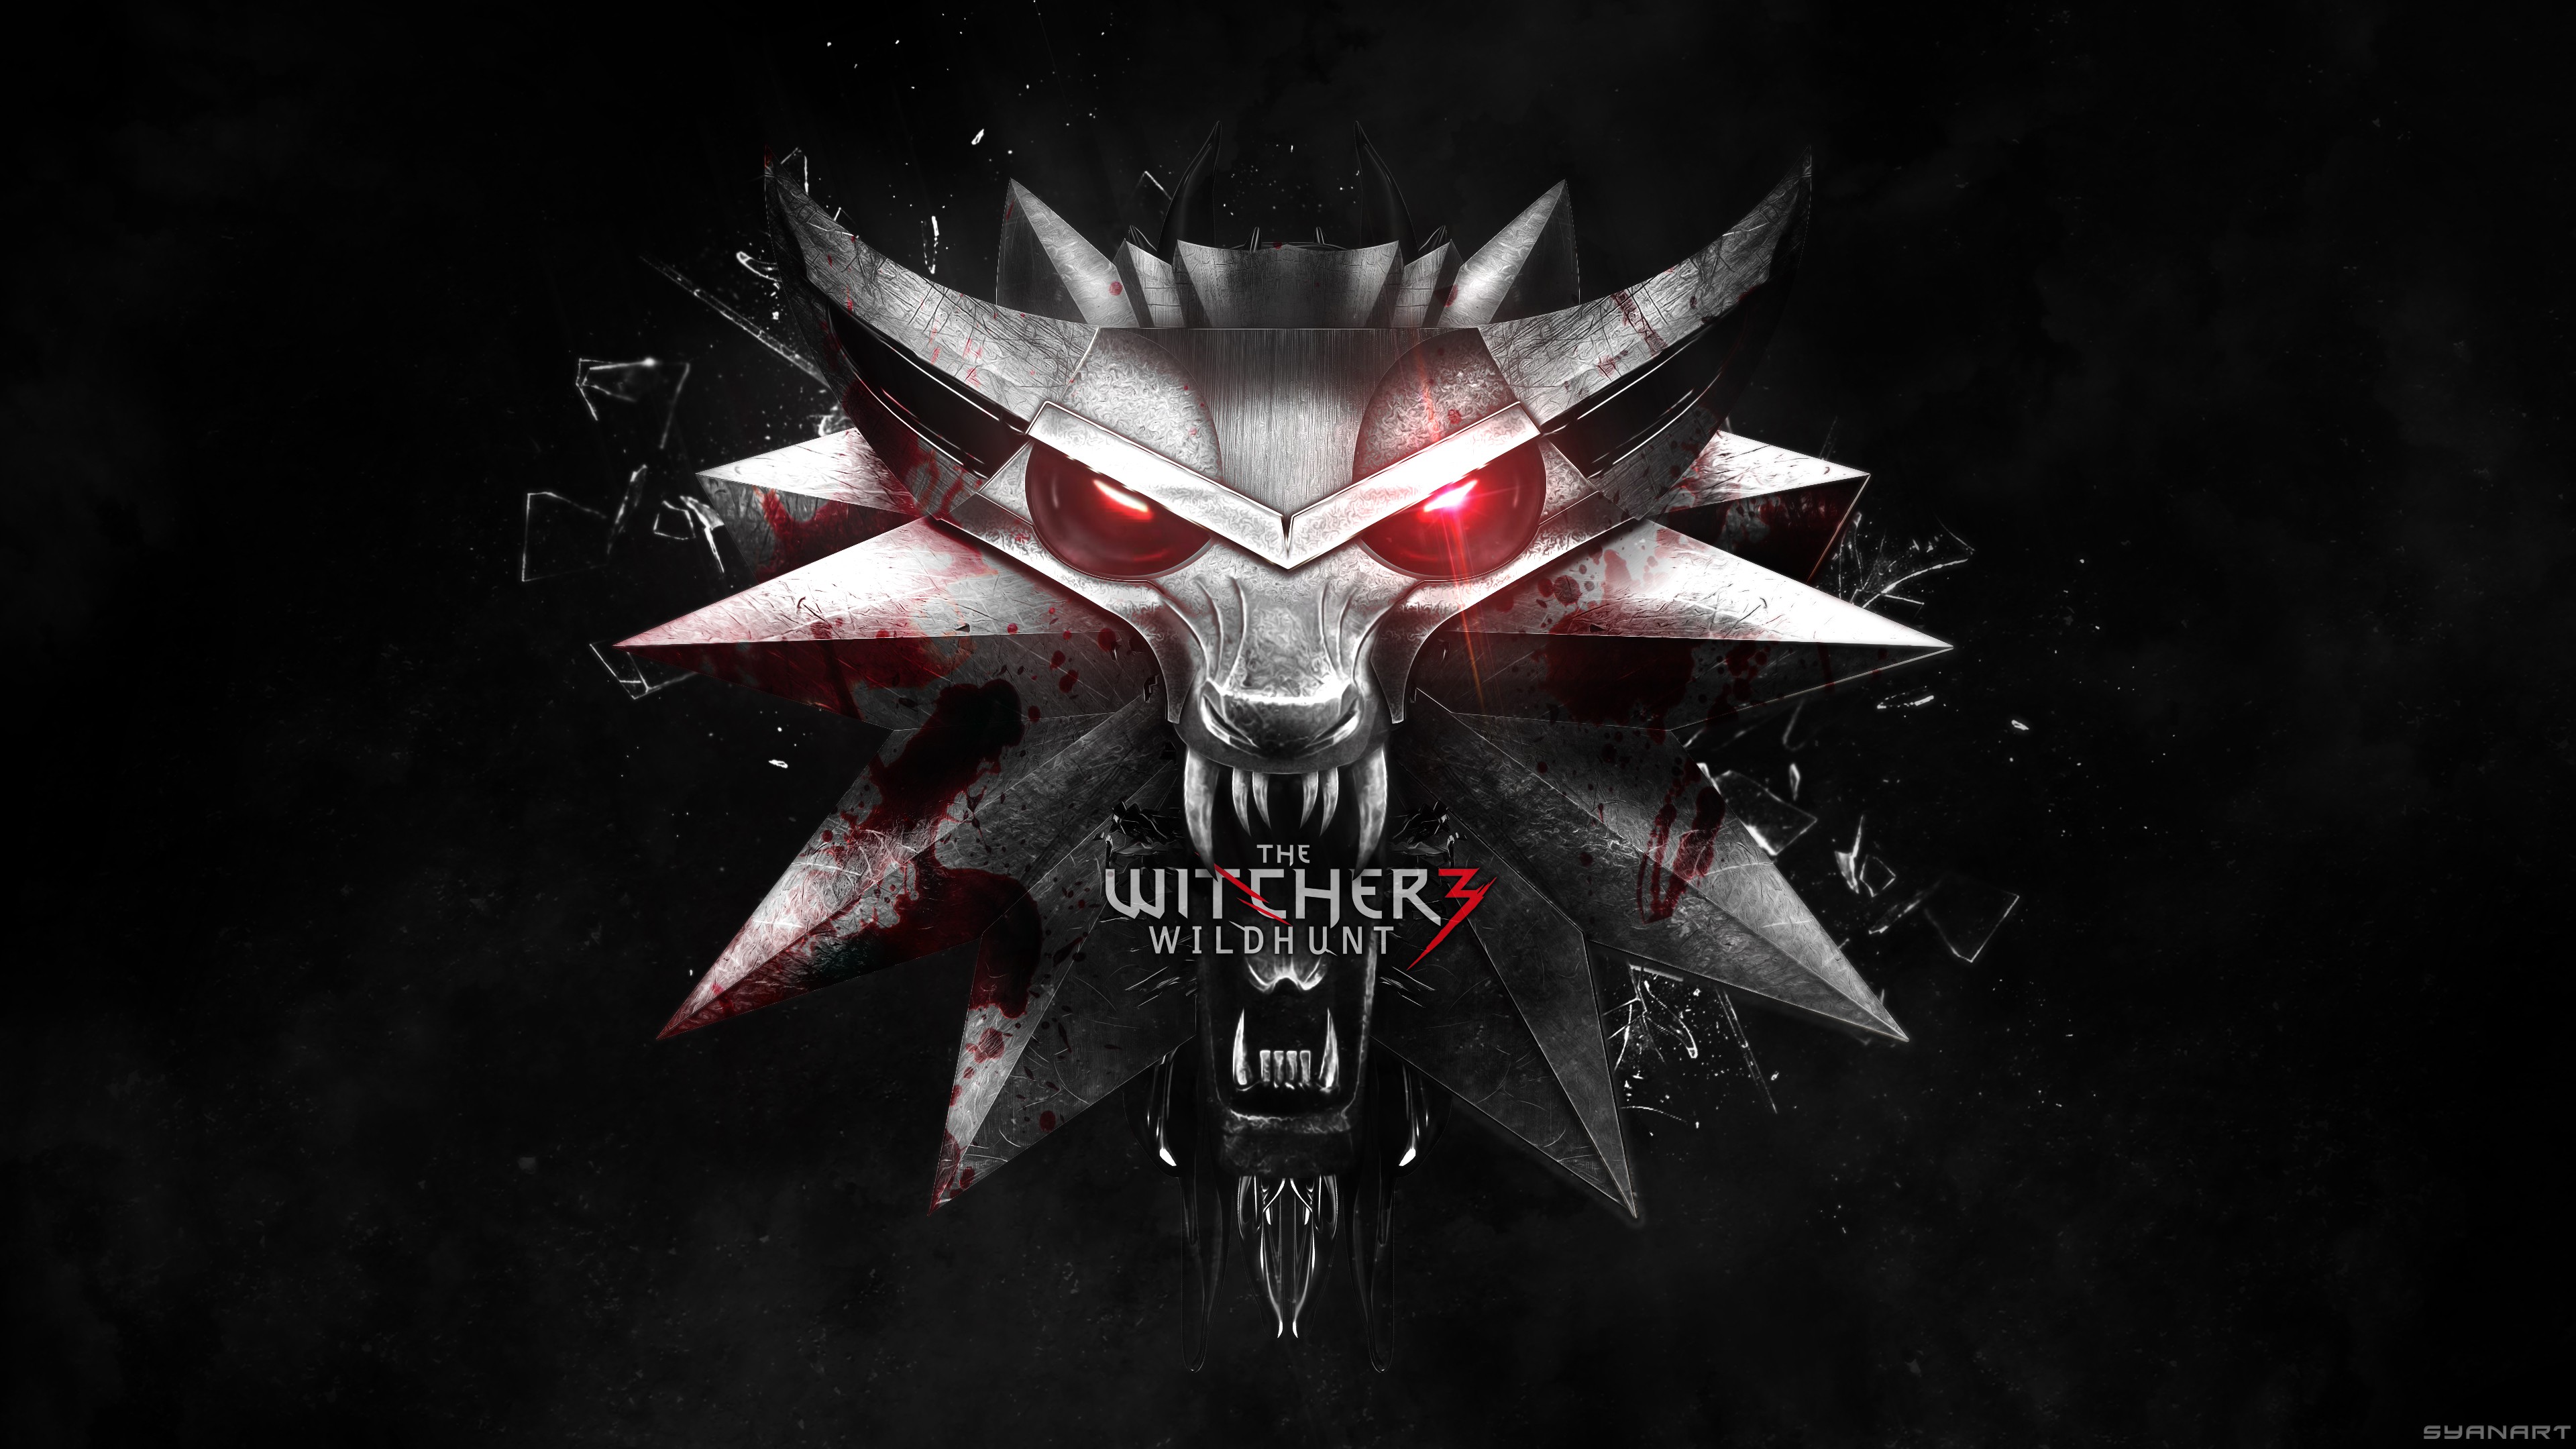  Witcher  3  wallpaper  4K    Download free wallpapers  for 